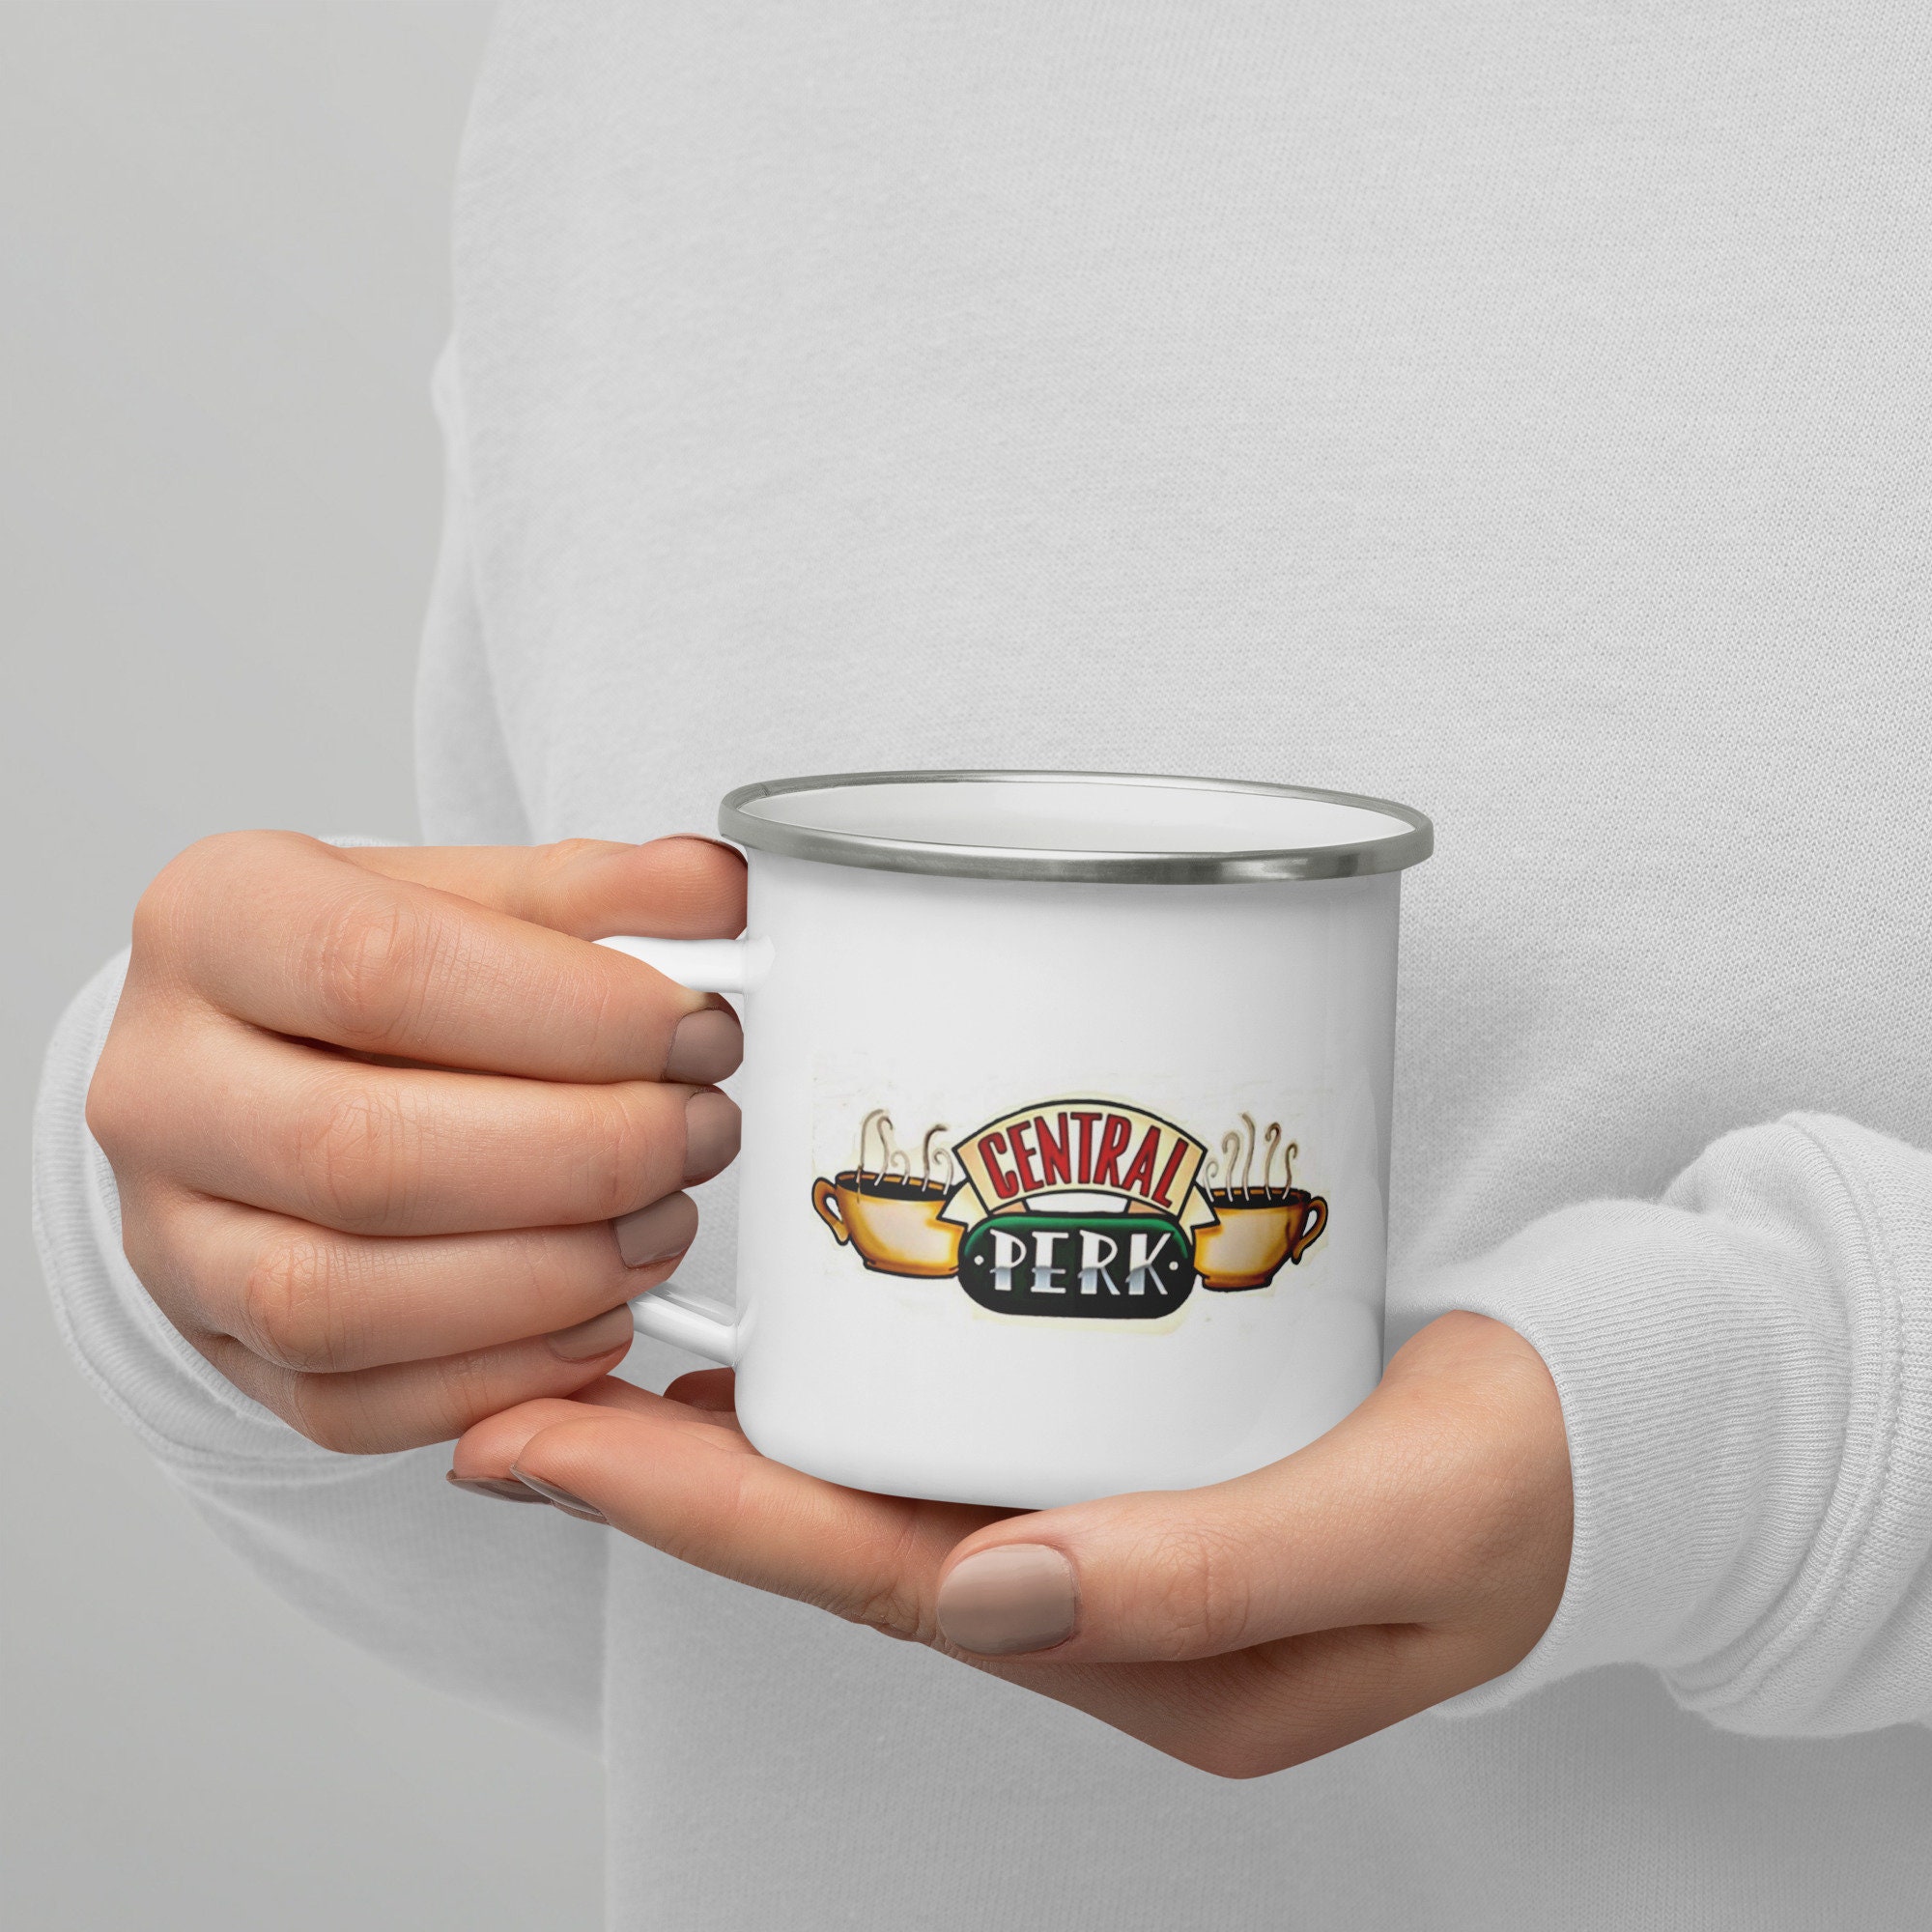 Friends Central Perk Combo Cup